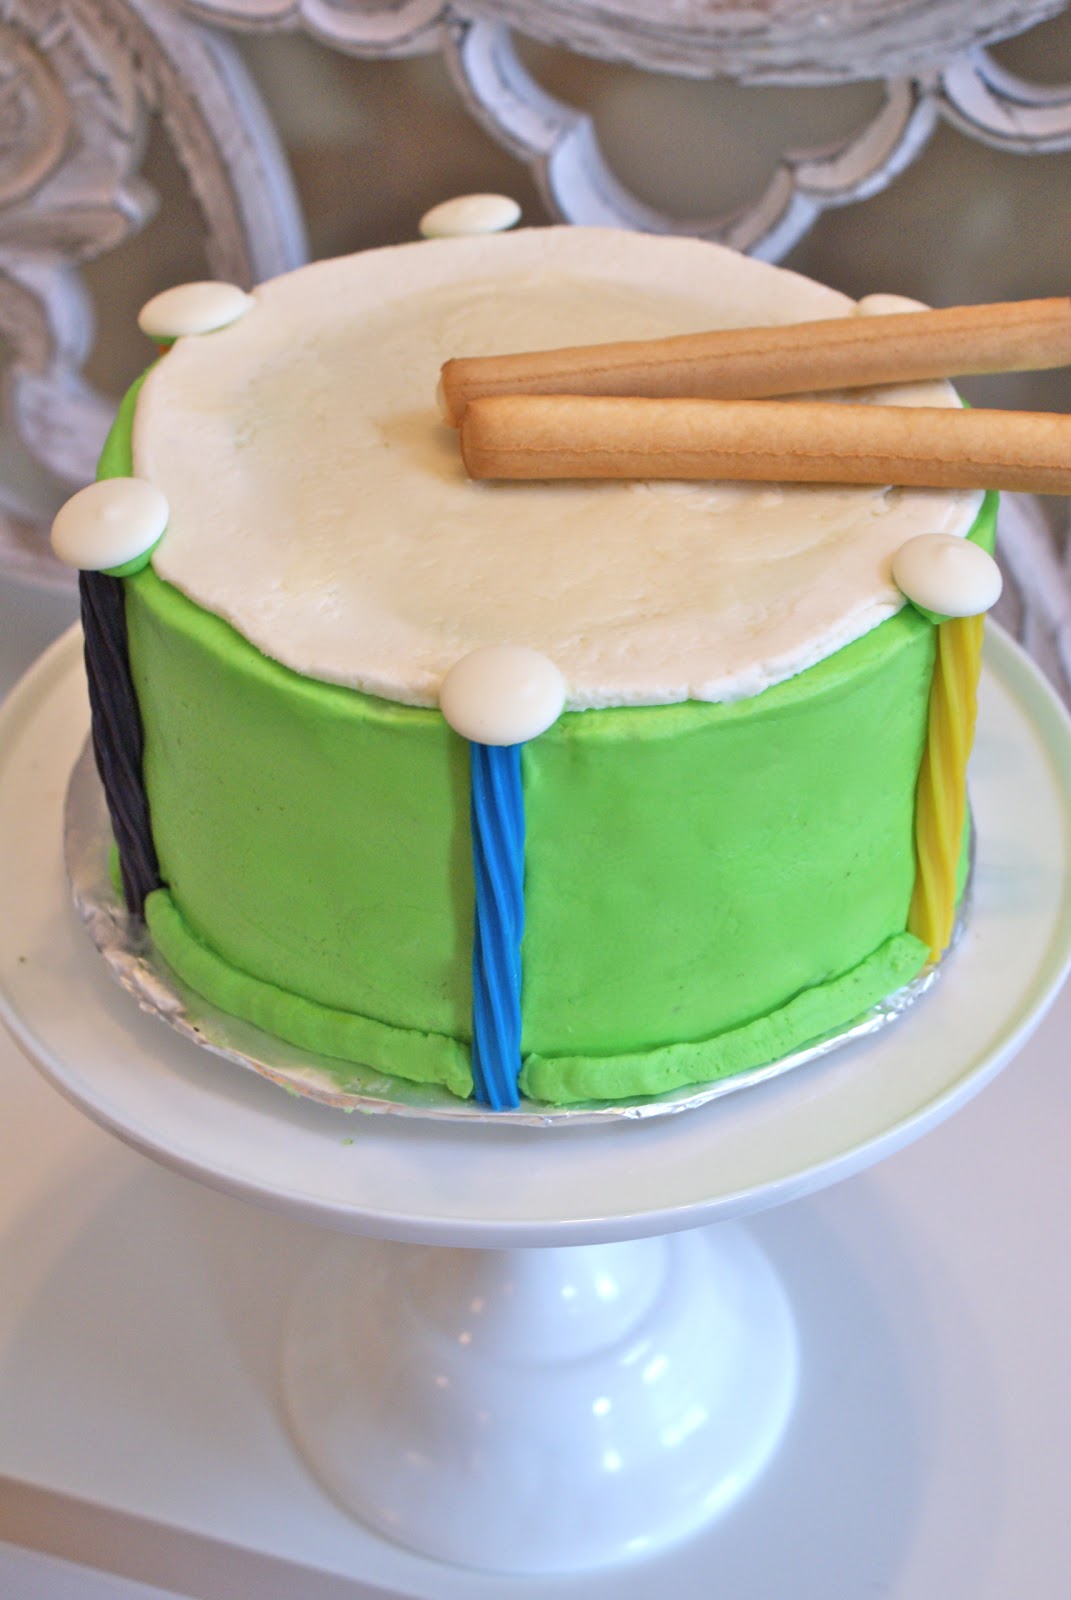 The Little Cake Co Drum Cake